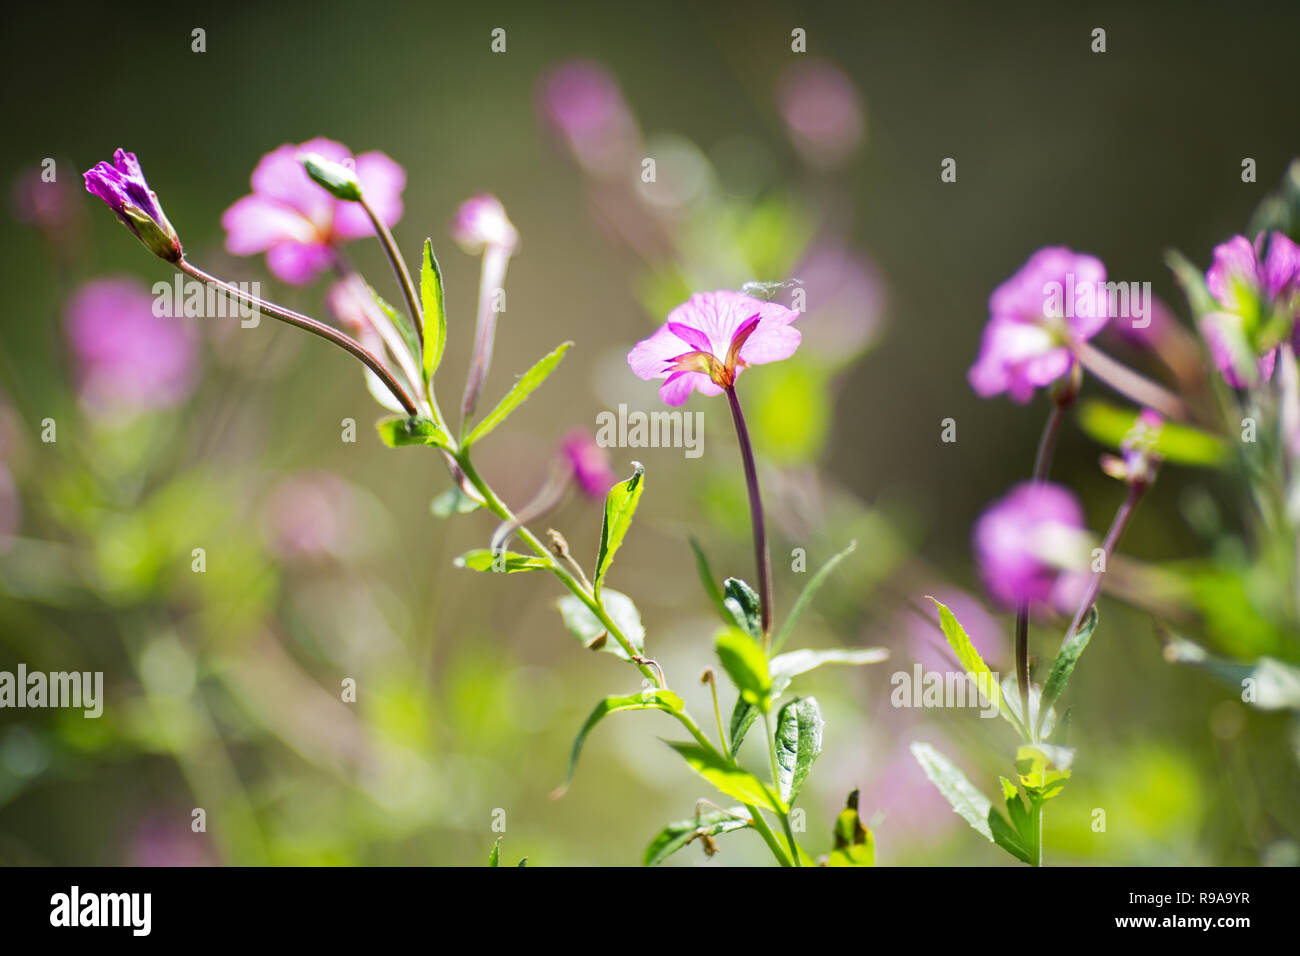 purple wild flowers on a background of blurred greens Stock Photo